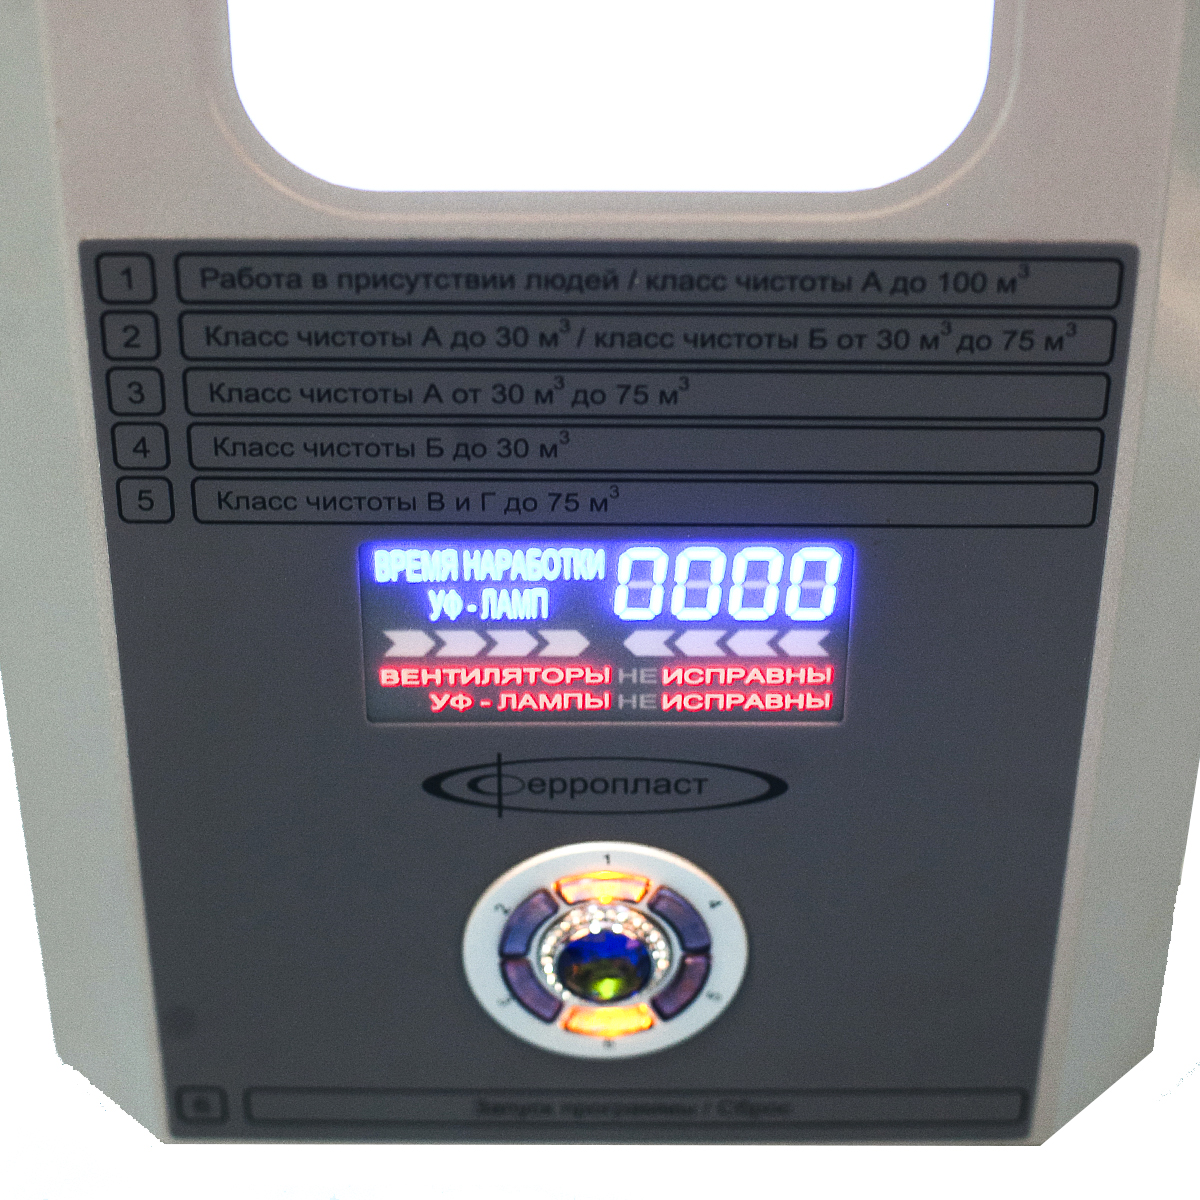 UV bactericidal recirculator with two lamps and forced circulation of air flow for disinfection of indoor air in presence of people - 3L